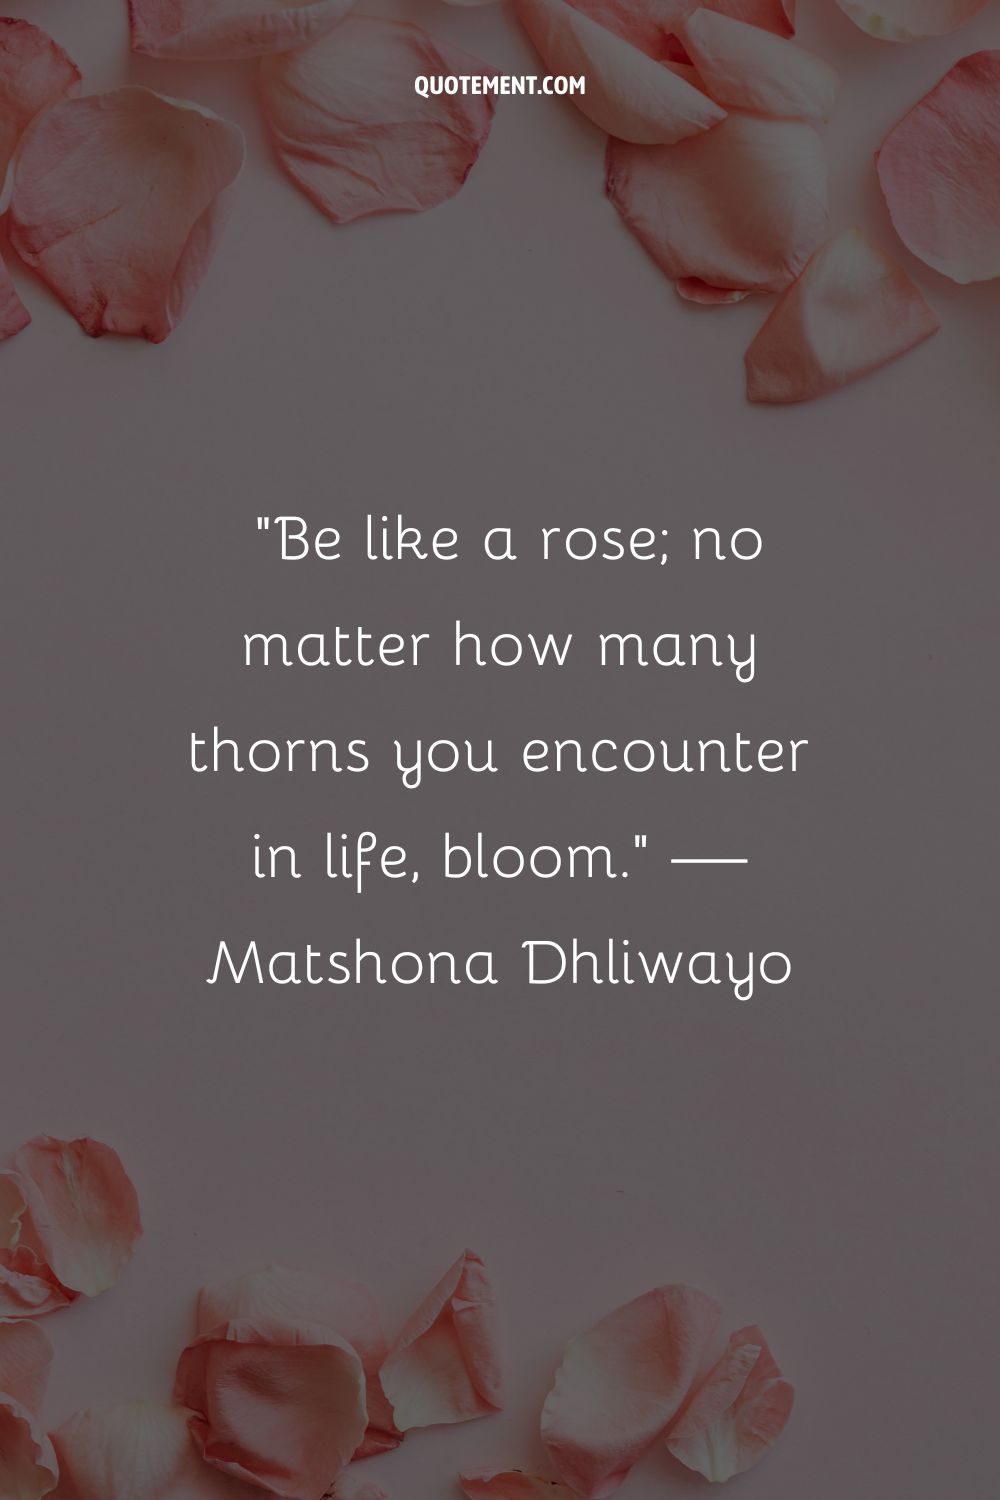 Elegant rose petals representing a quote about blooming.
